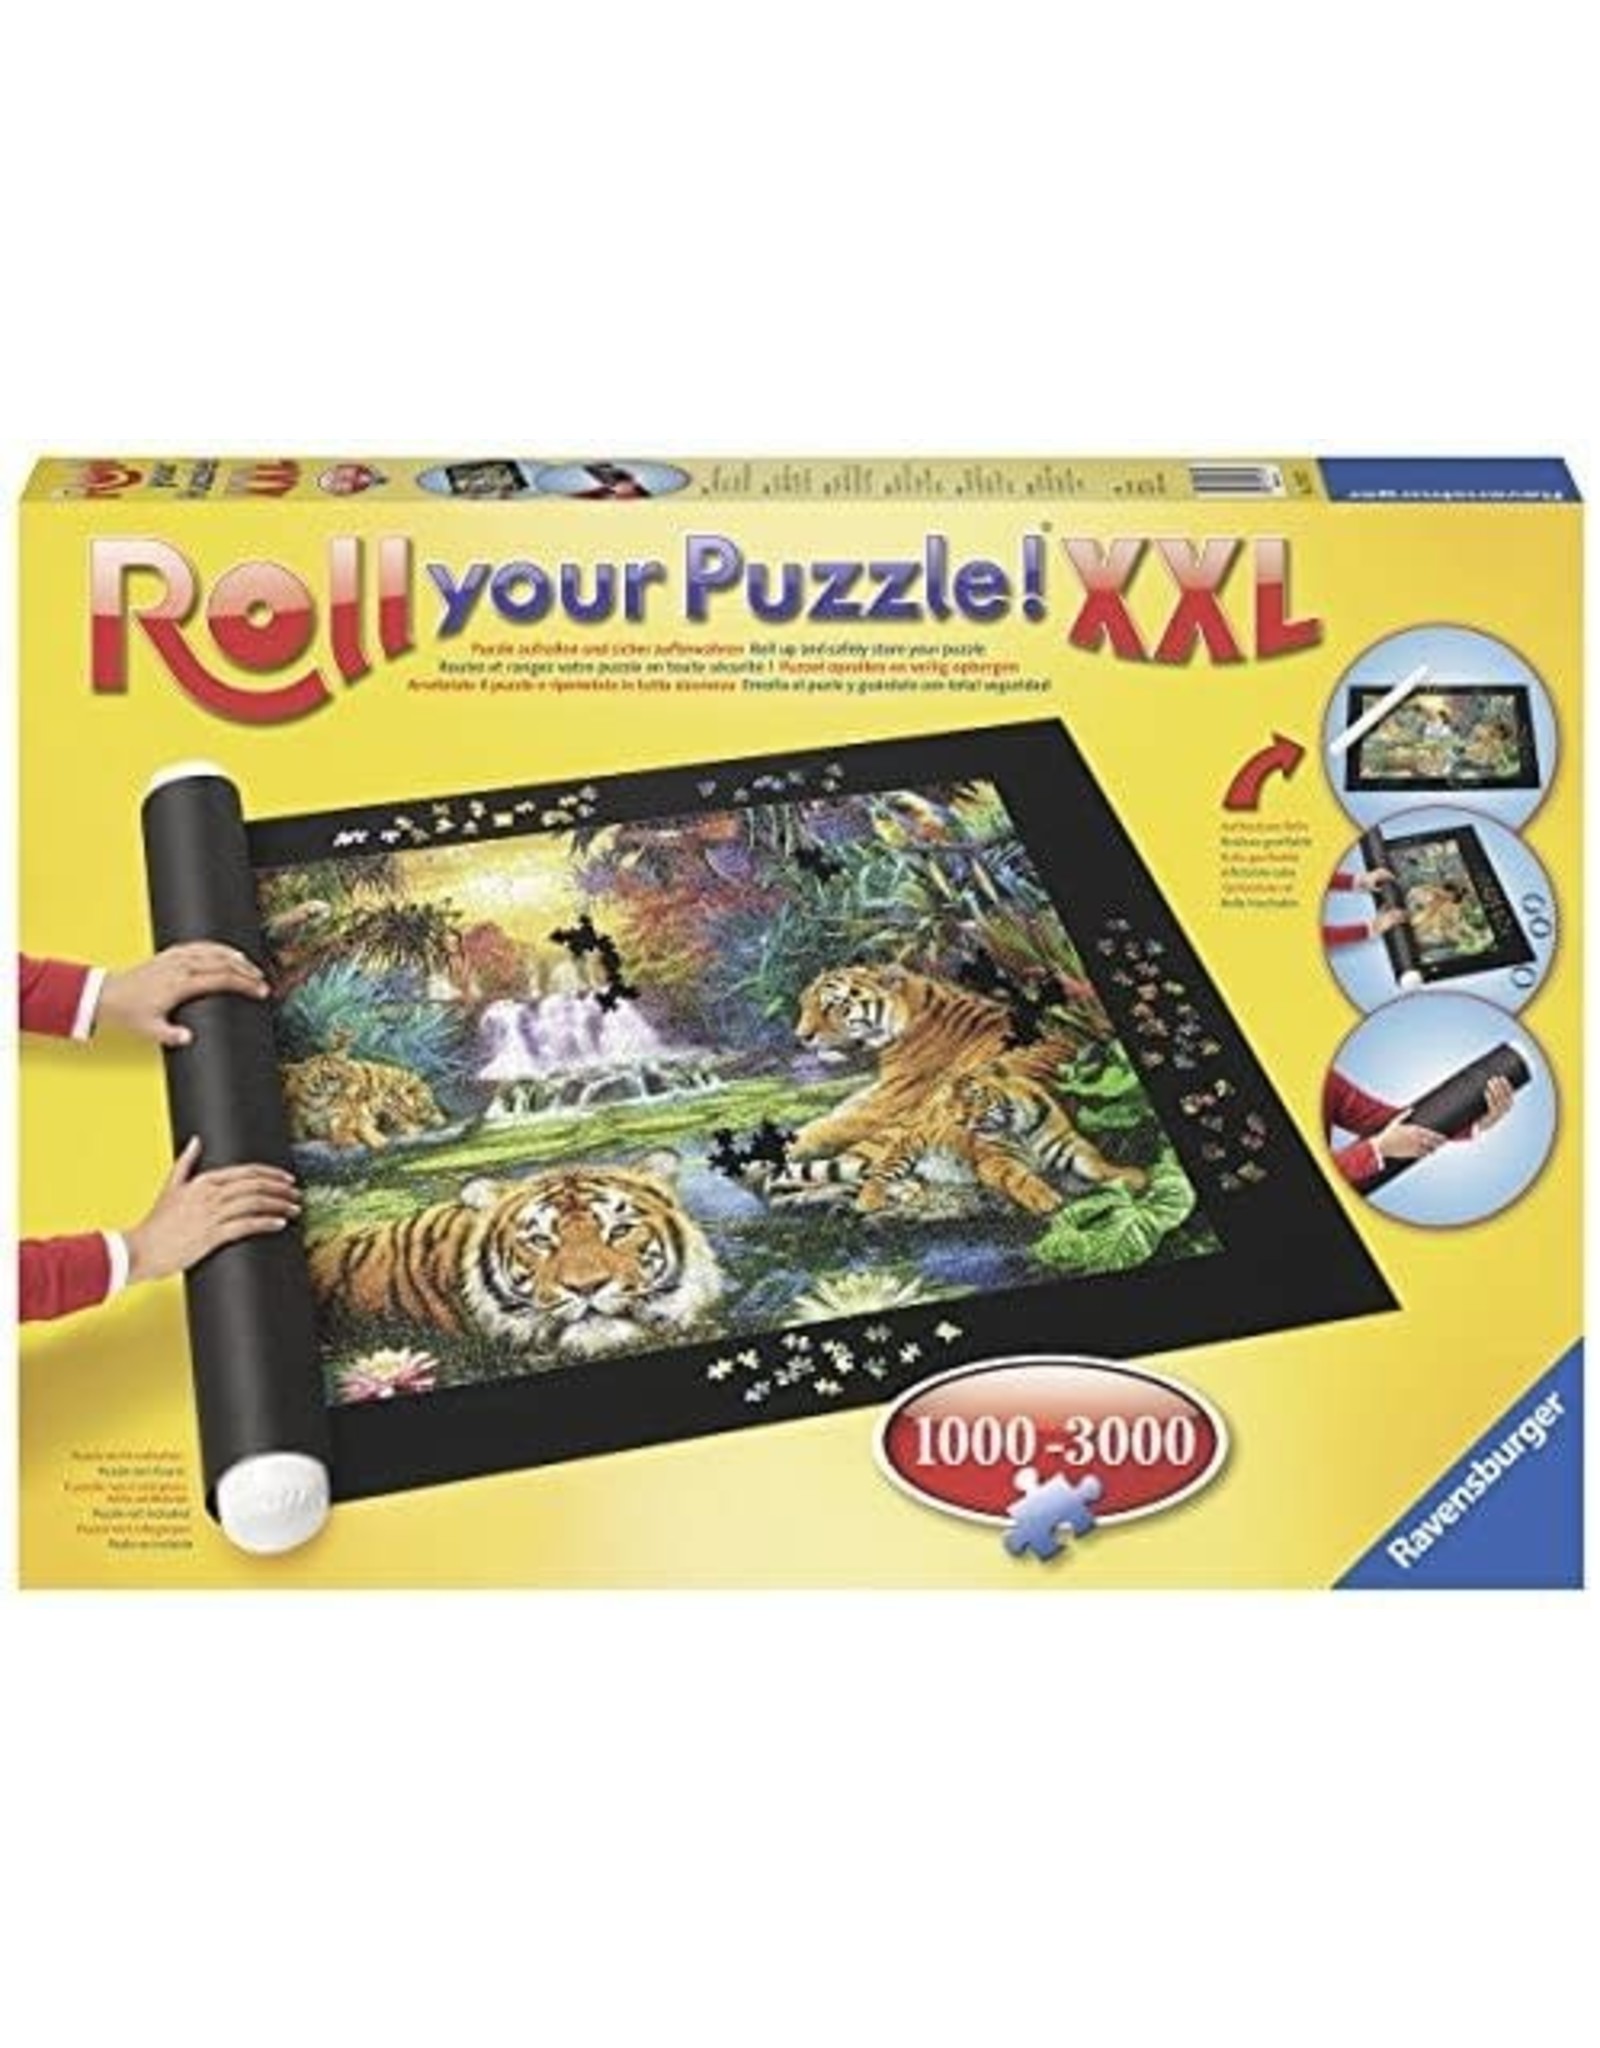 Ravensburger Roll Your Puzzle XXL 1000-3000 pc